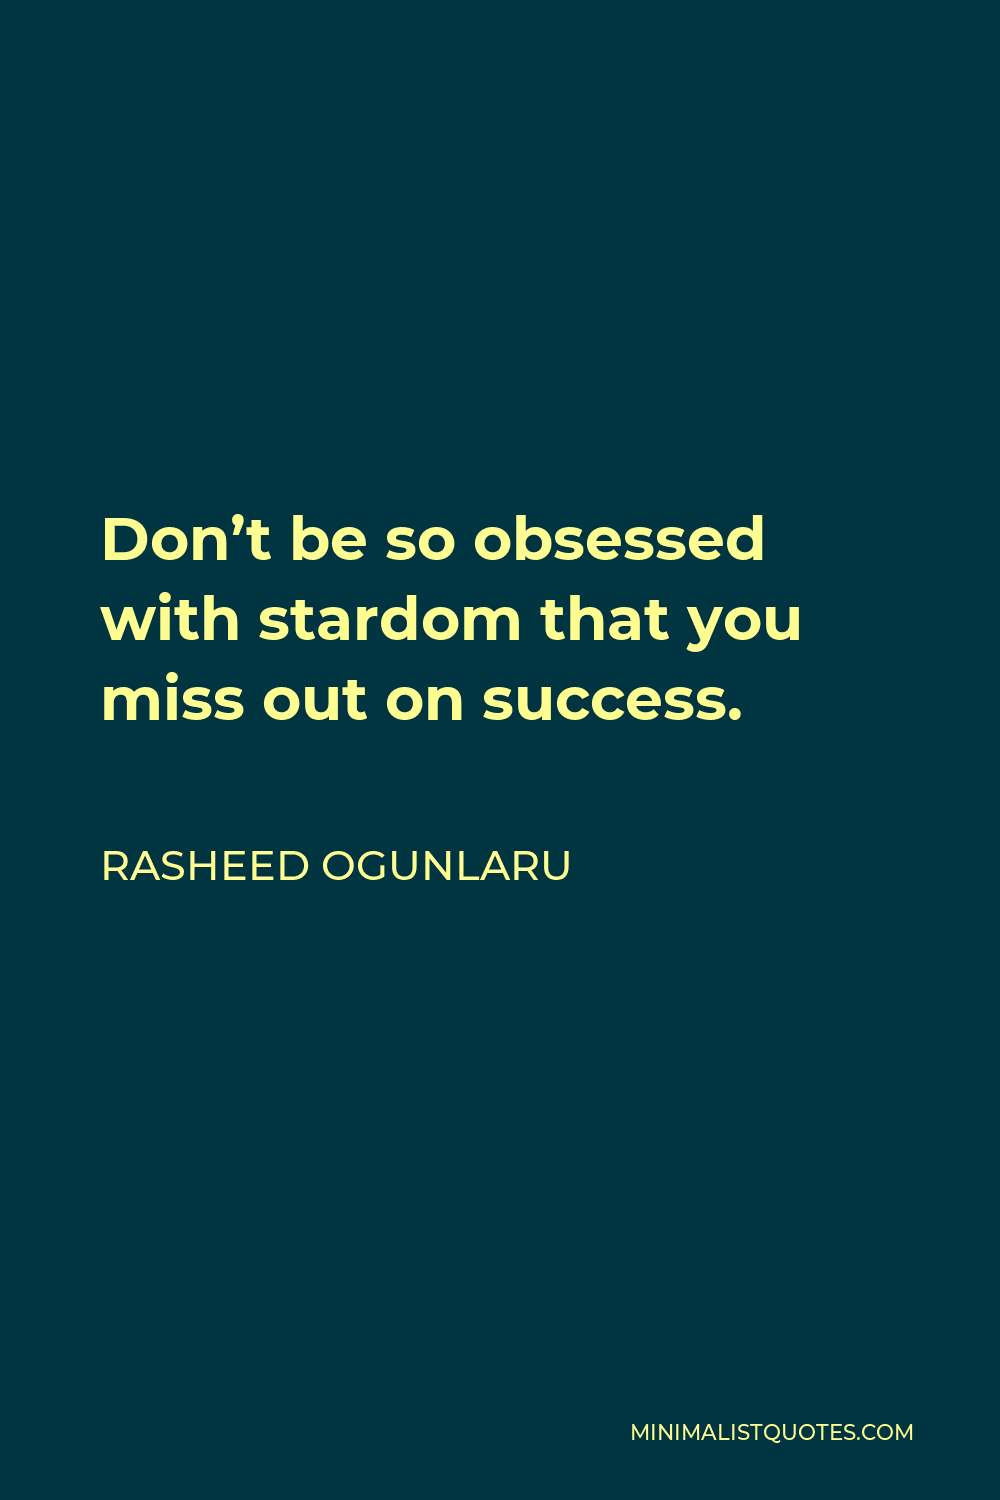 Rasheed Ogunlaru Quote - Don’t be so obsessed with stardom that you miss out on success.